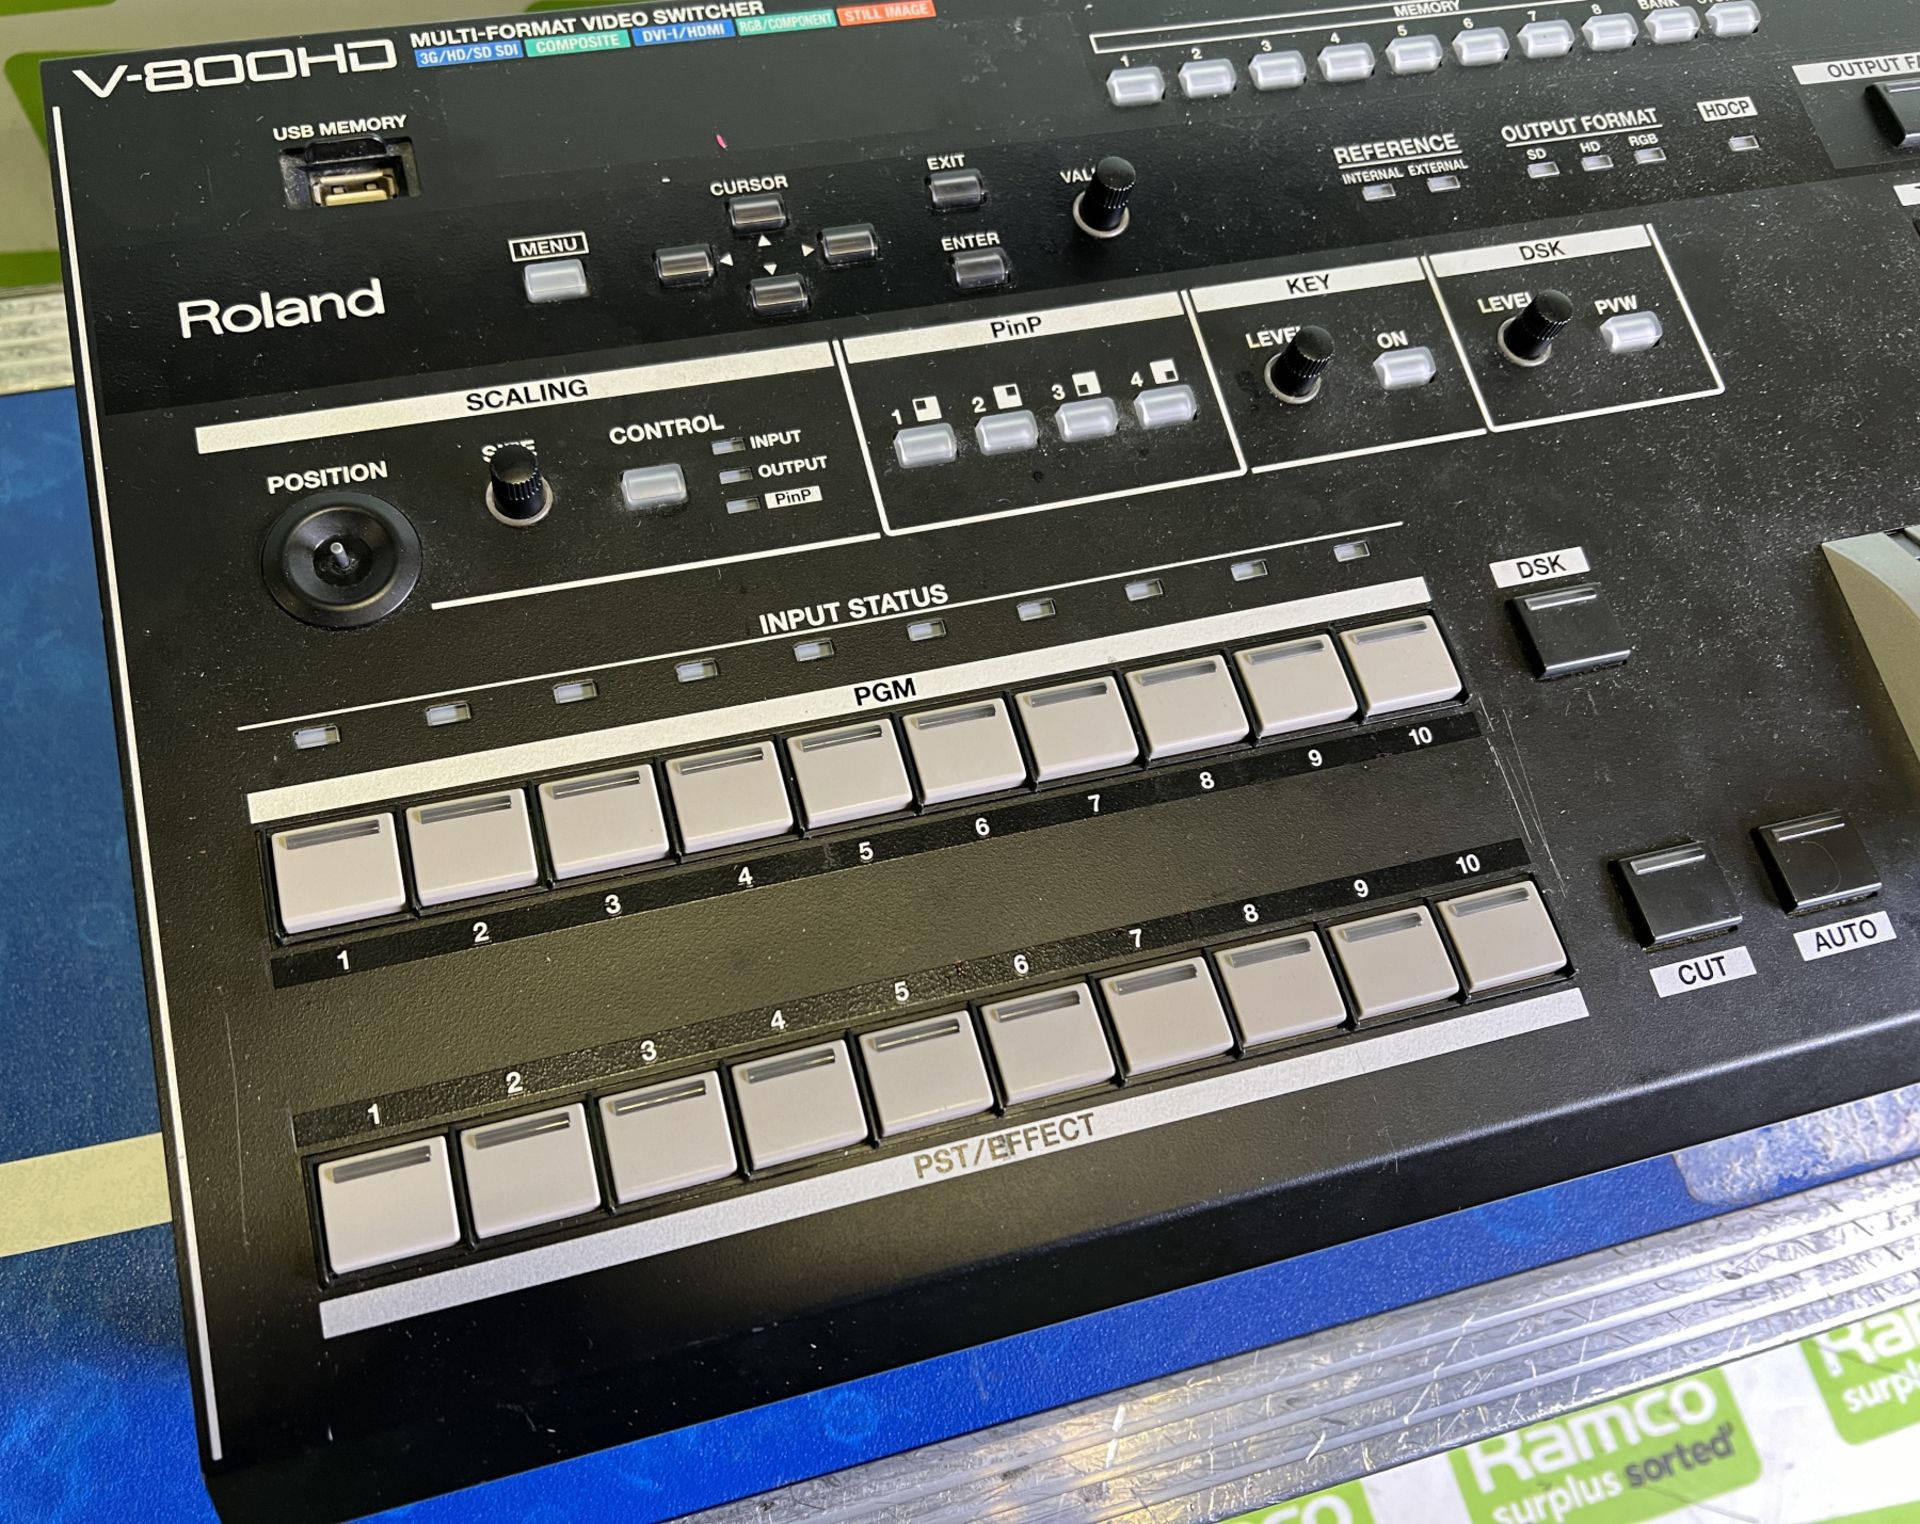 Roland V800HD vision mixer in flight case - case dimensions: L 690 x W 370 x H 230mm - FAULTY OUTPUT - Image 3 of 9